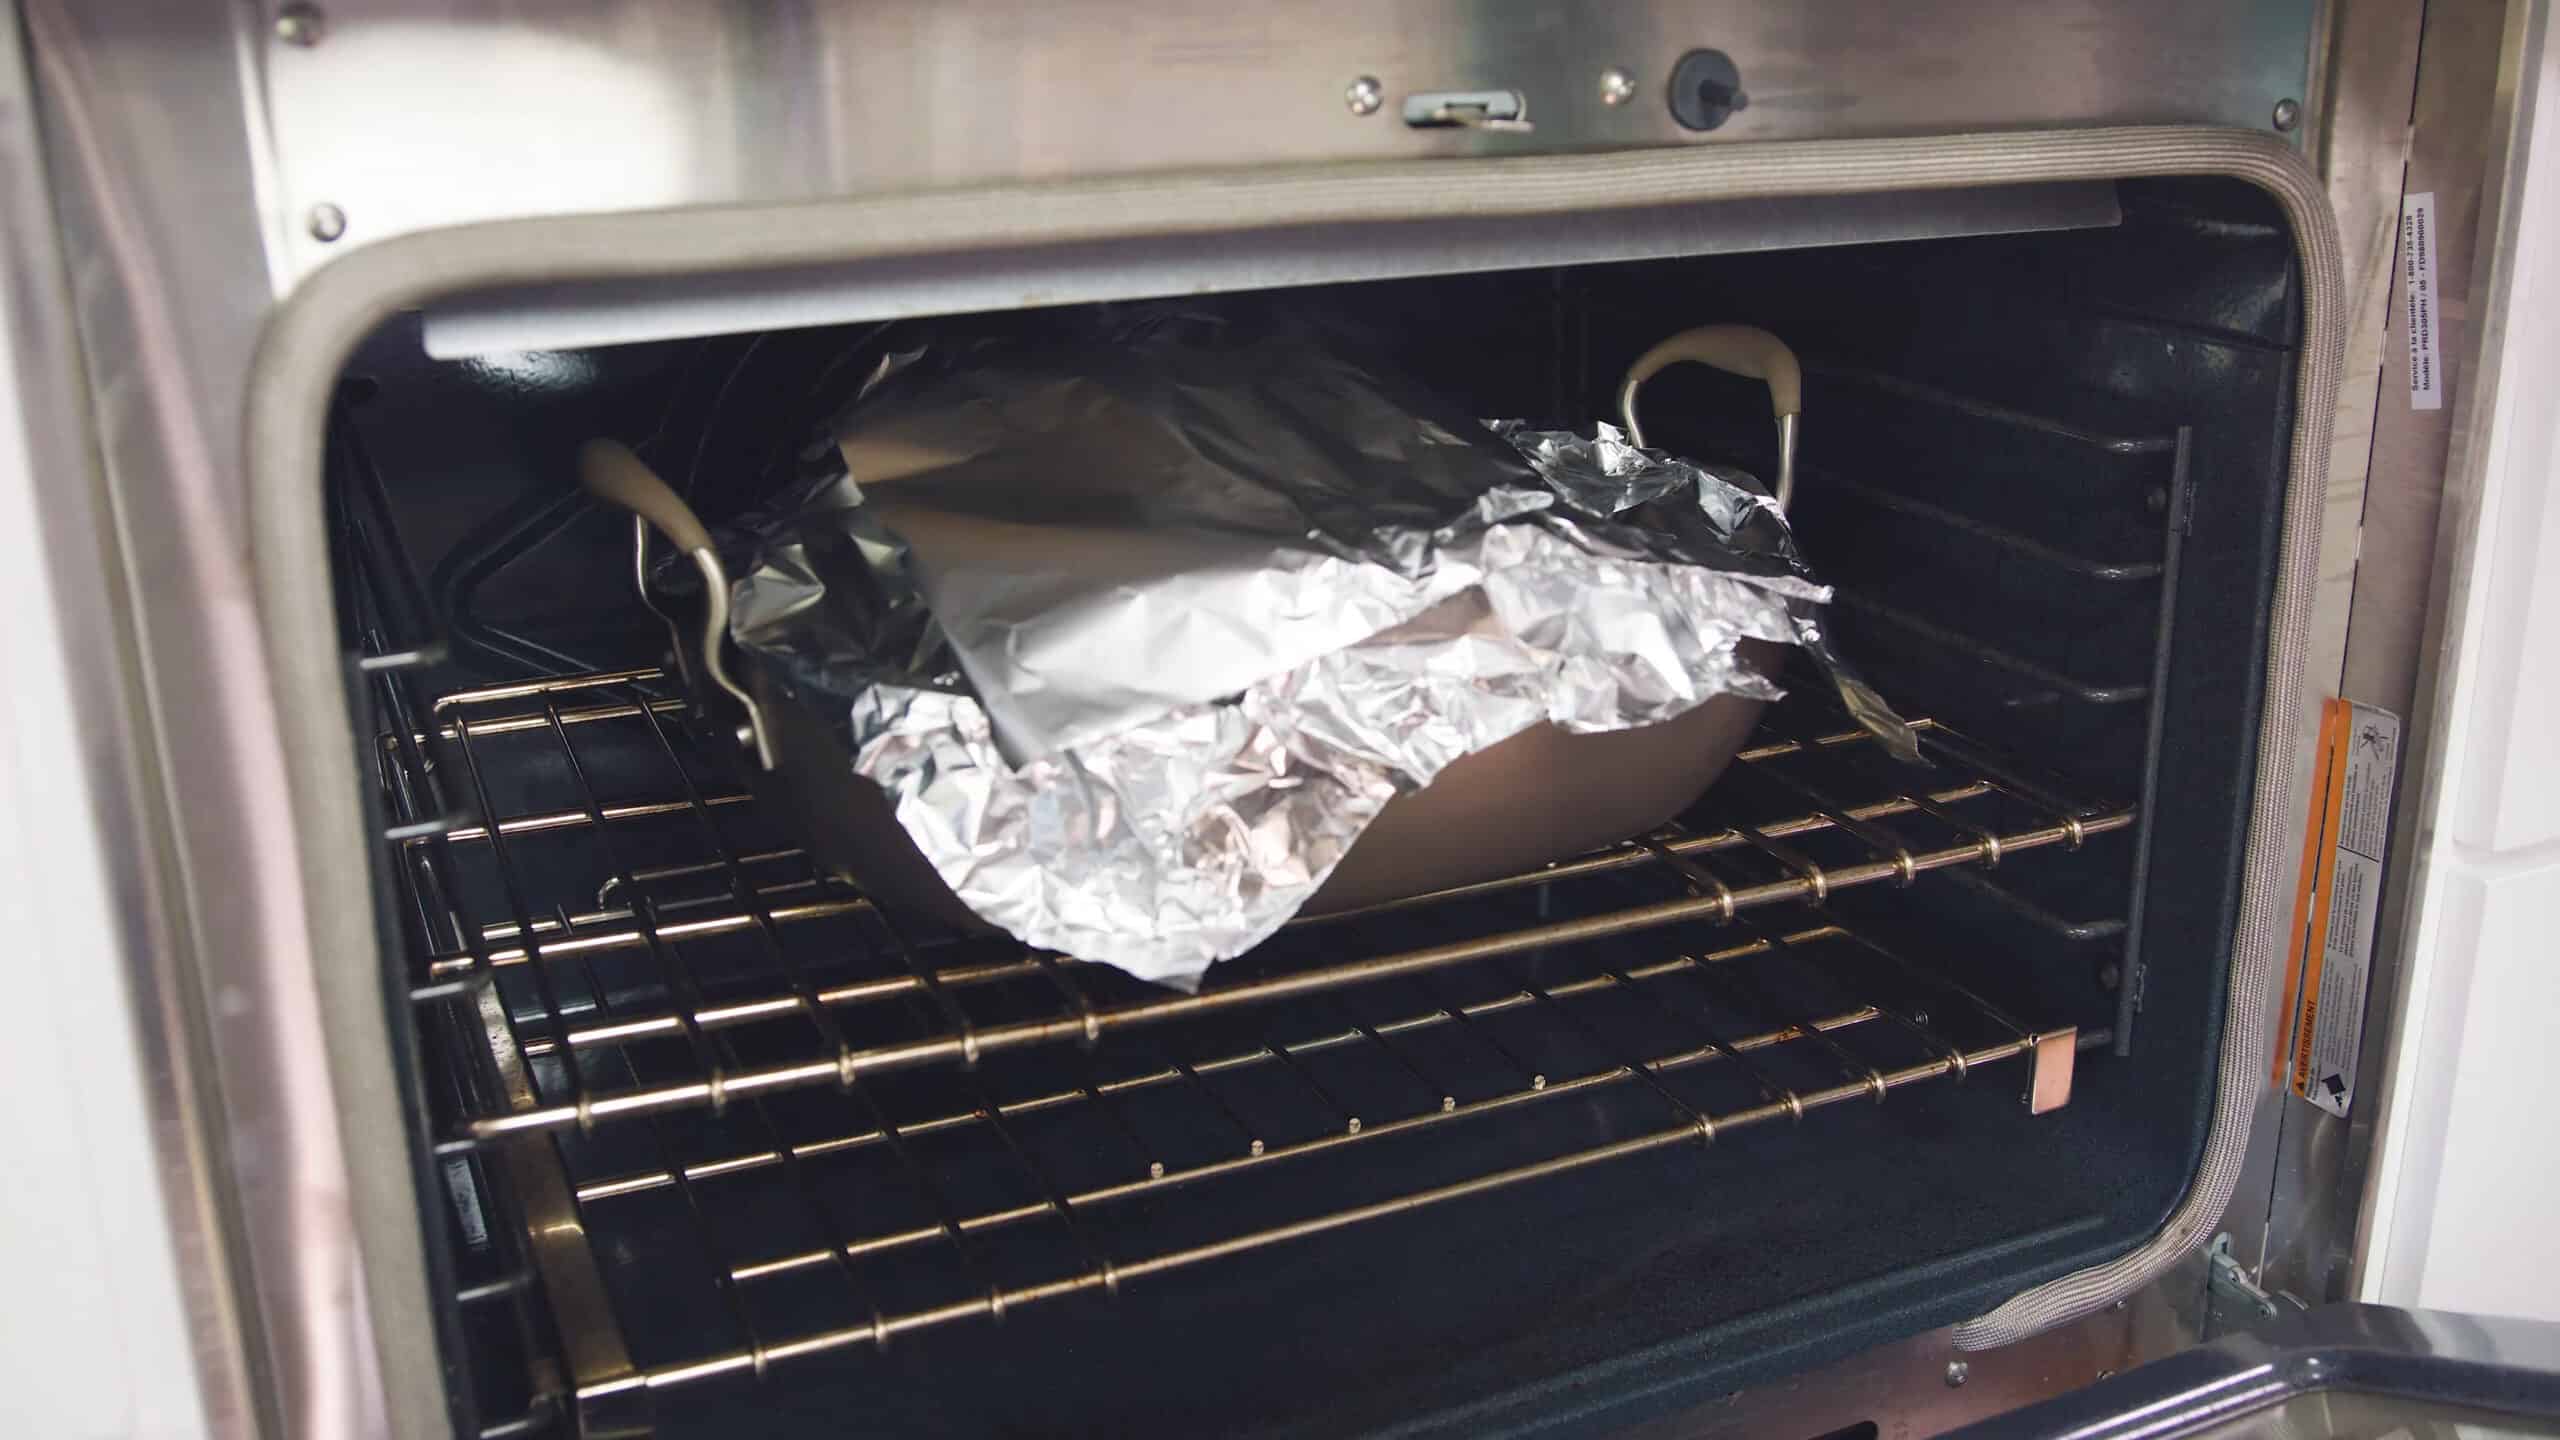 Angled view of open oven with stainless steel roasting pan covered in aluminum foil on rack in the middle of the oven.